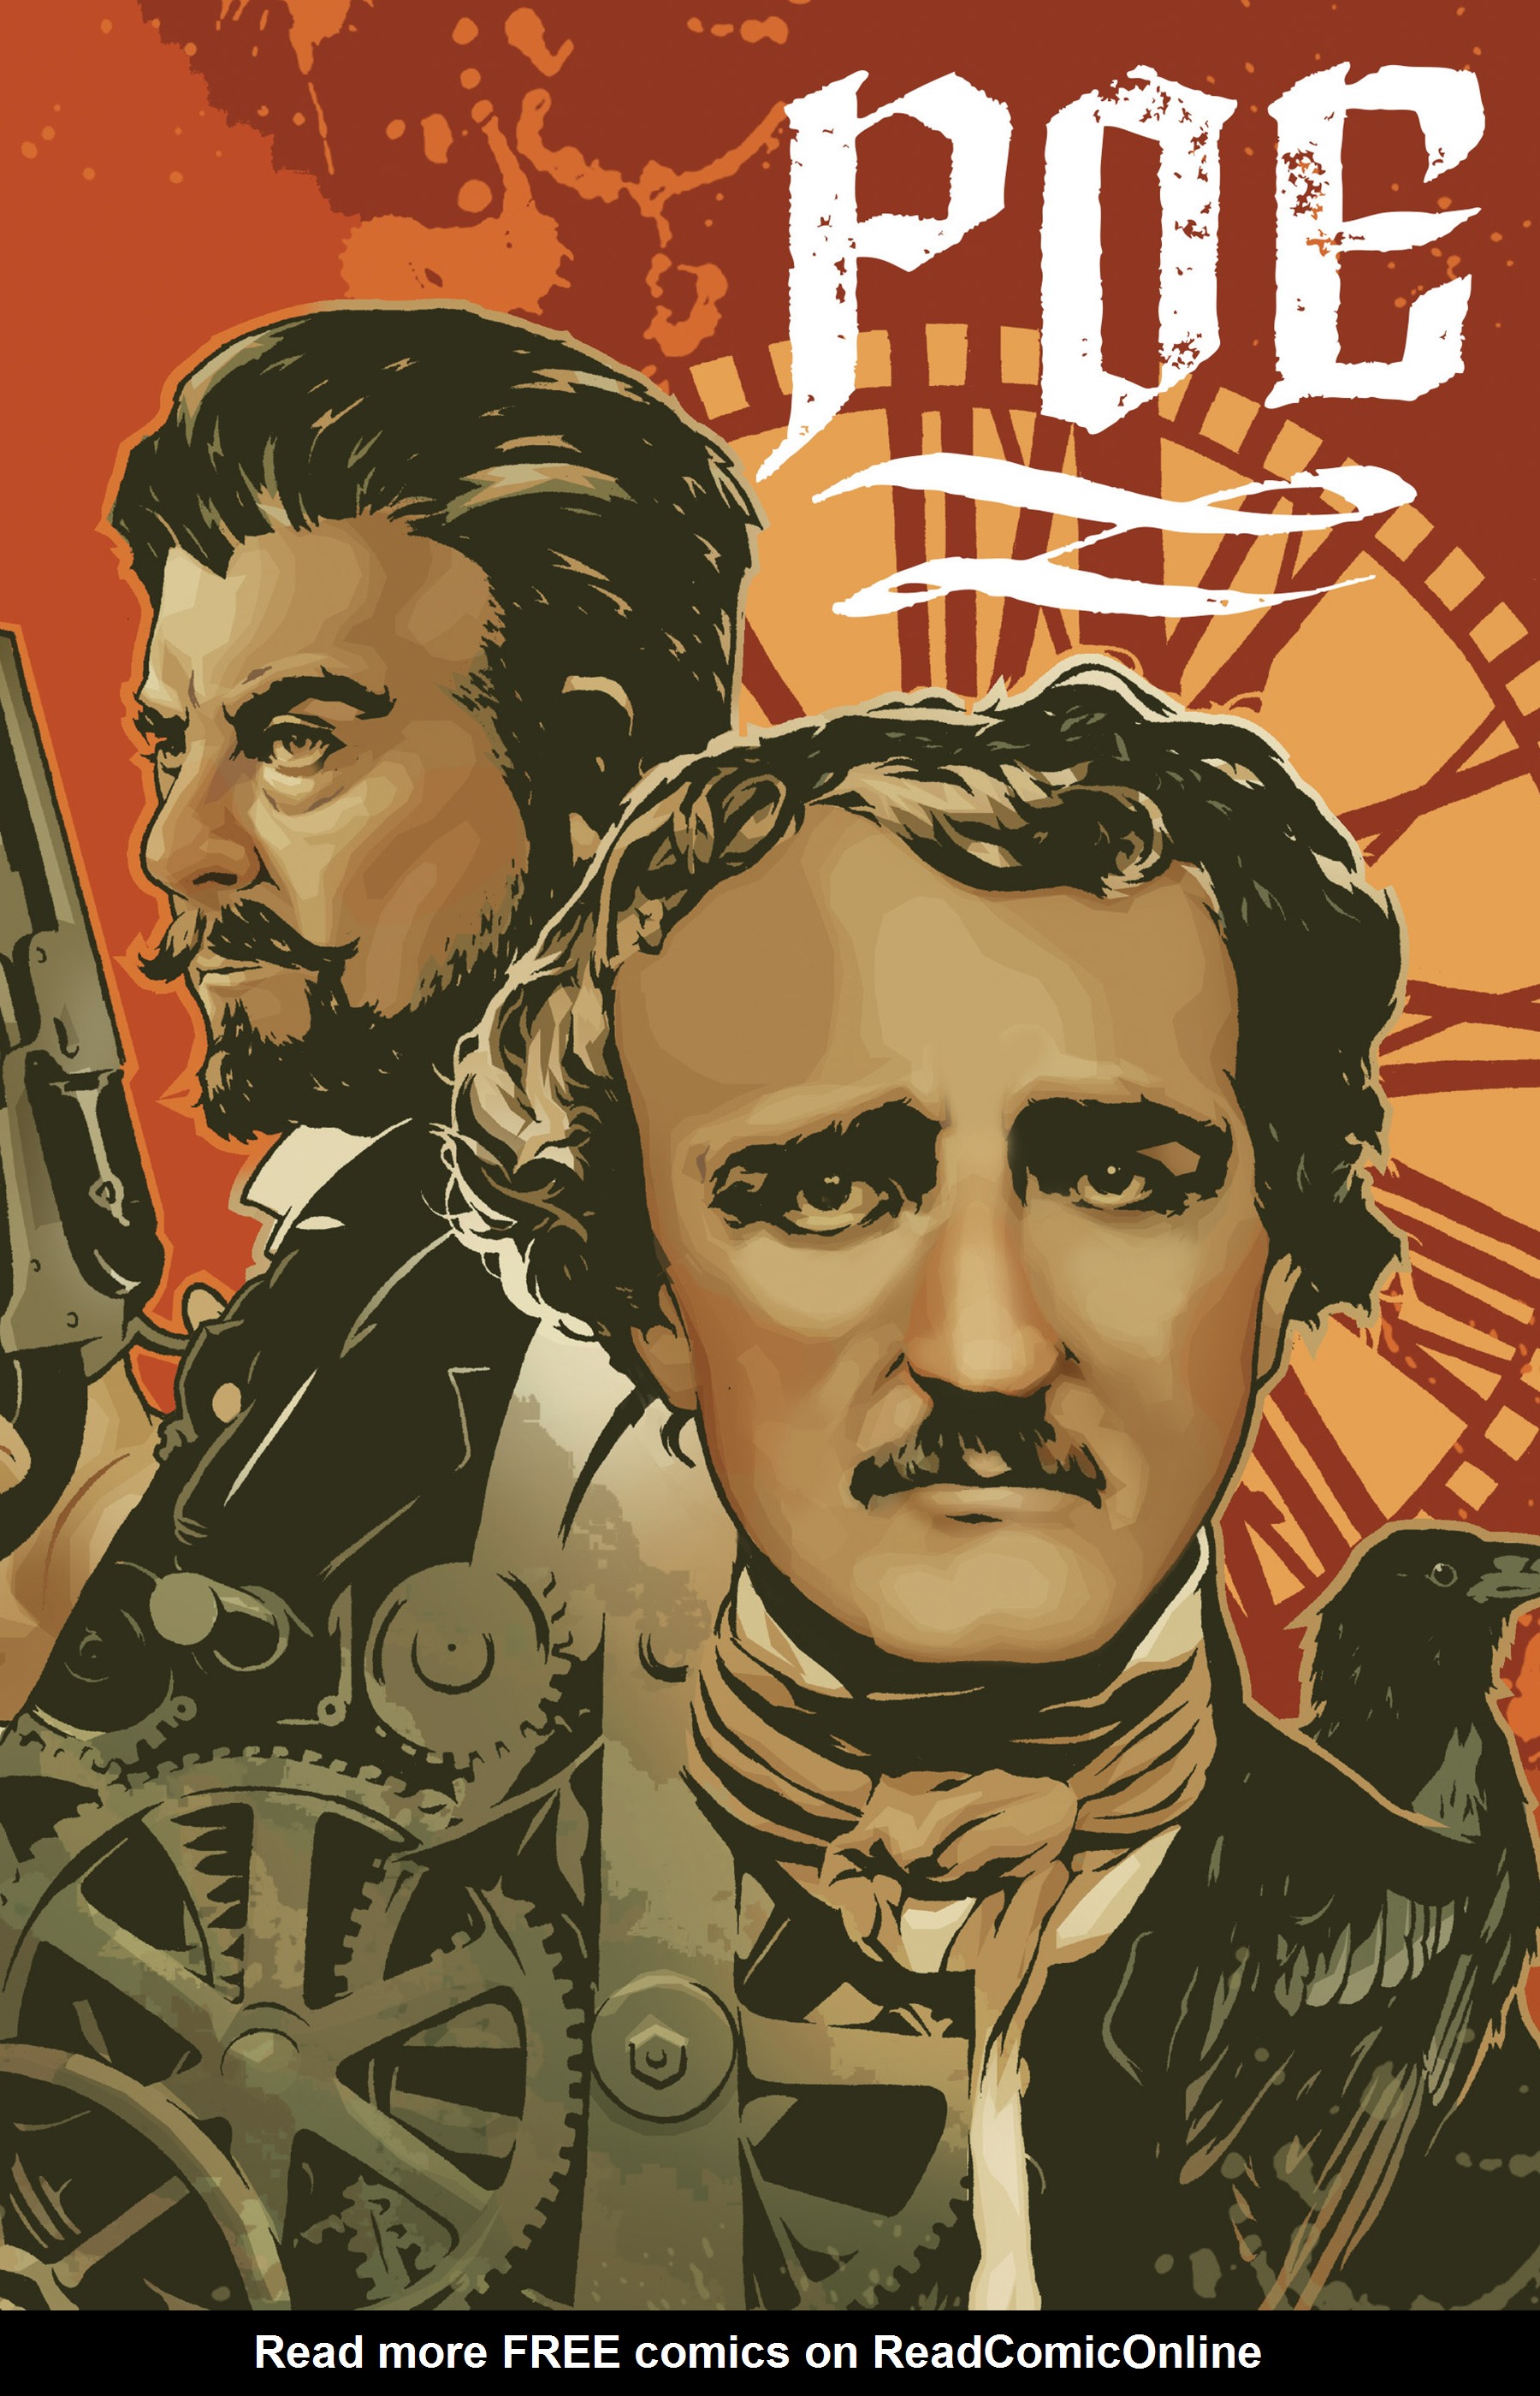 Read online Poe comic -  Issue # TPB - 1